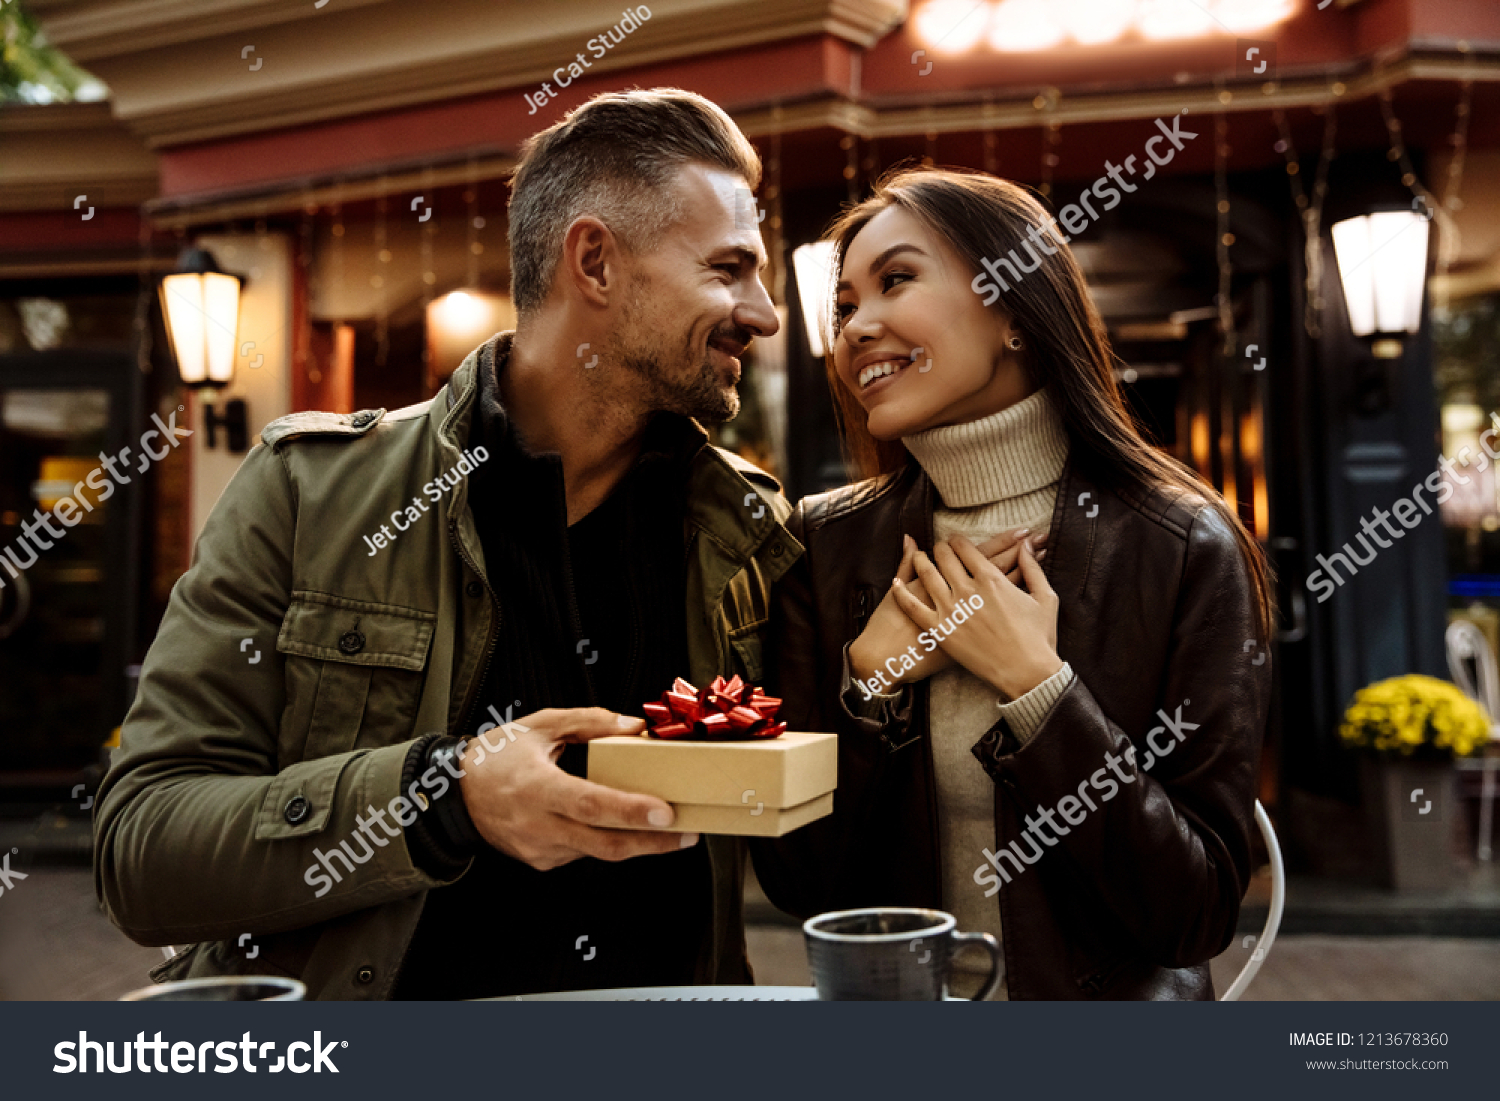 Couple. Holiday. Cafe. Man is giving a gift box to his woman. Both are in warm casual clothes smiling while sitting in the cafe outdoors #1213678360